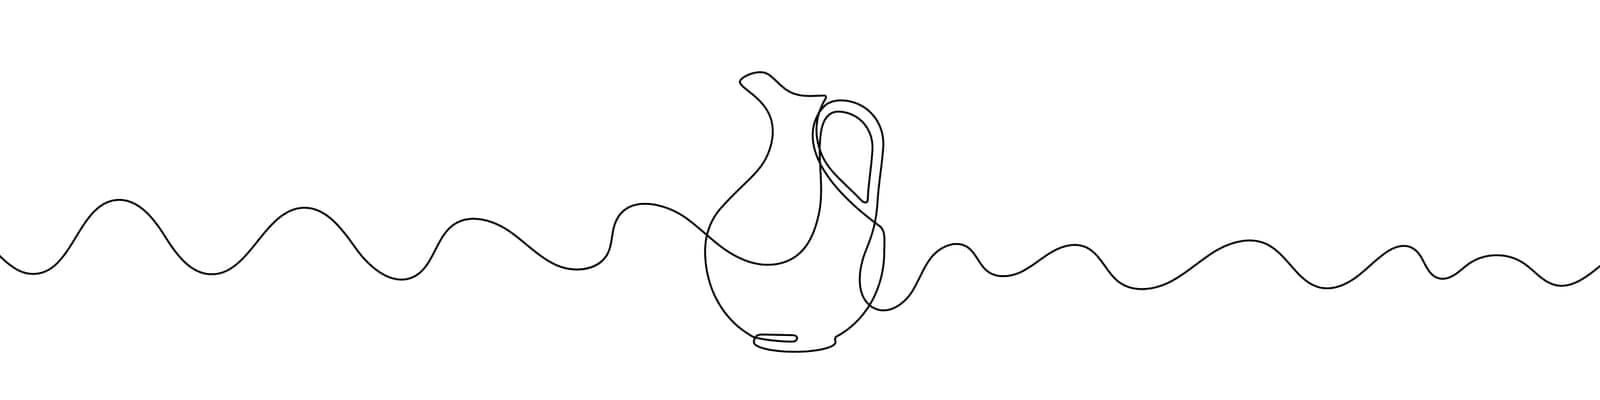 Continuous line drawing of water jug. Line art of jug. One line drawing background. Vector illustration.